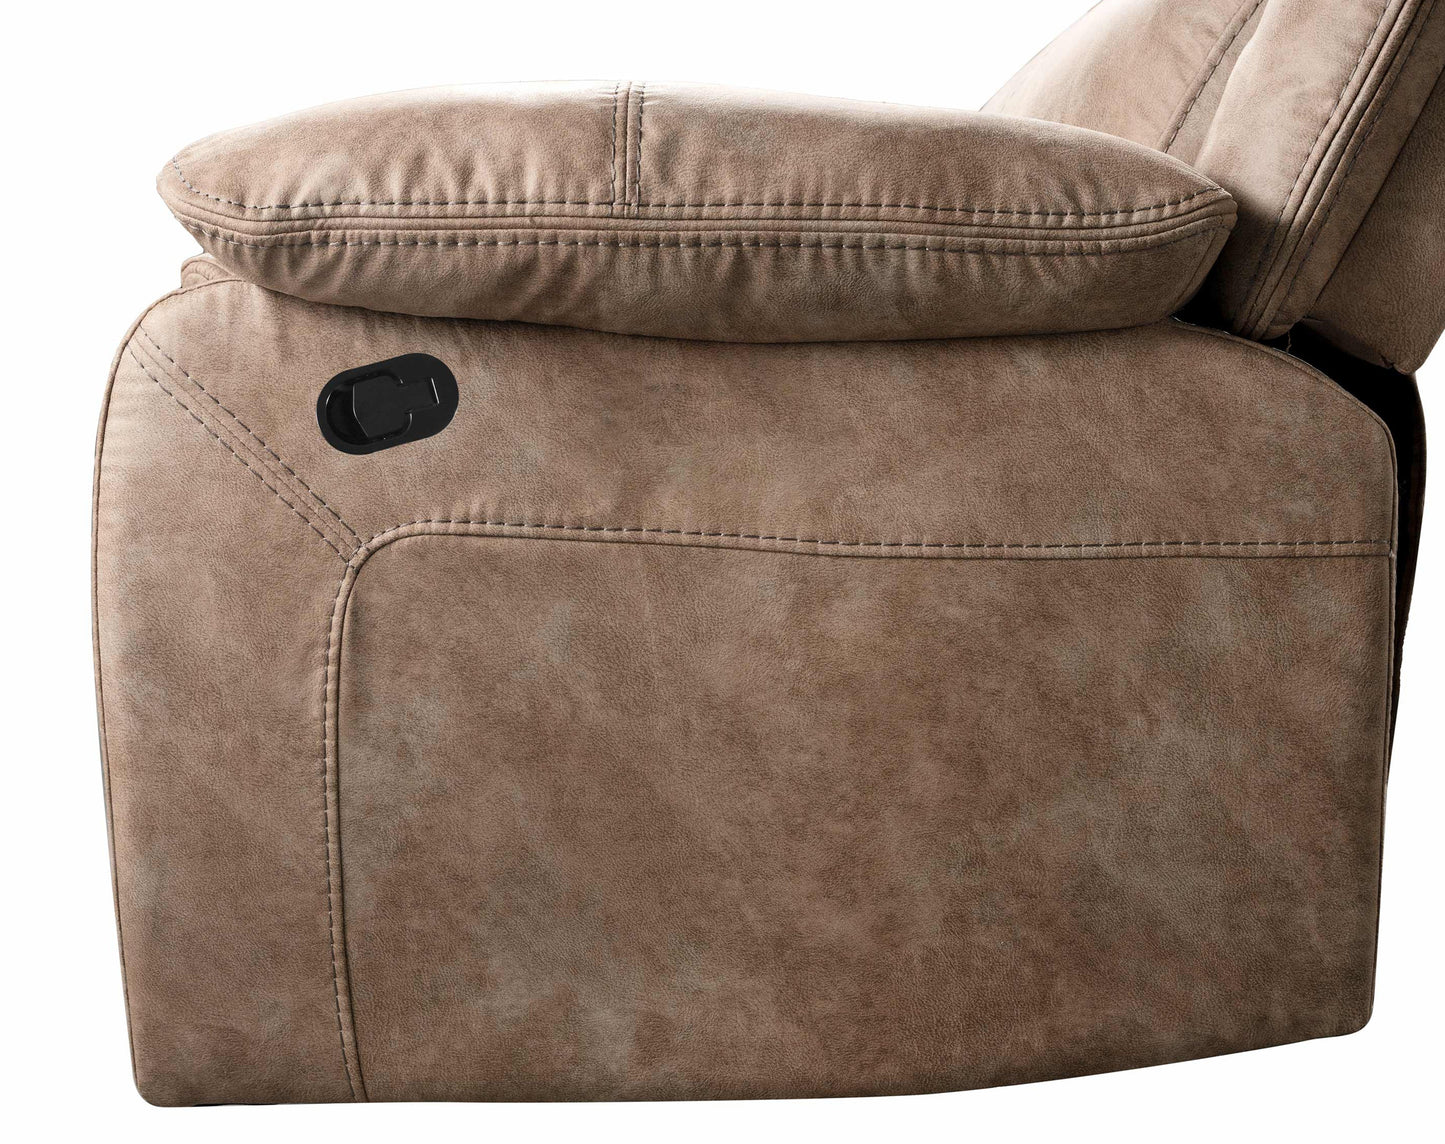 Ensley Faux Leather Reclining Sofa with USB Port in Sand Finish